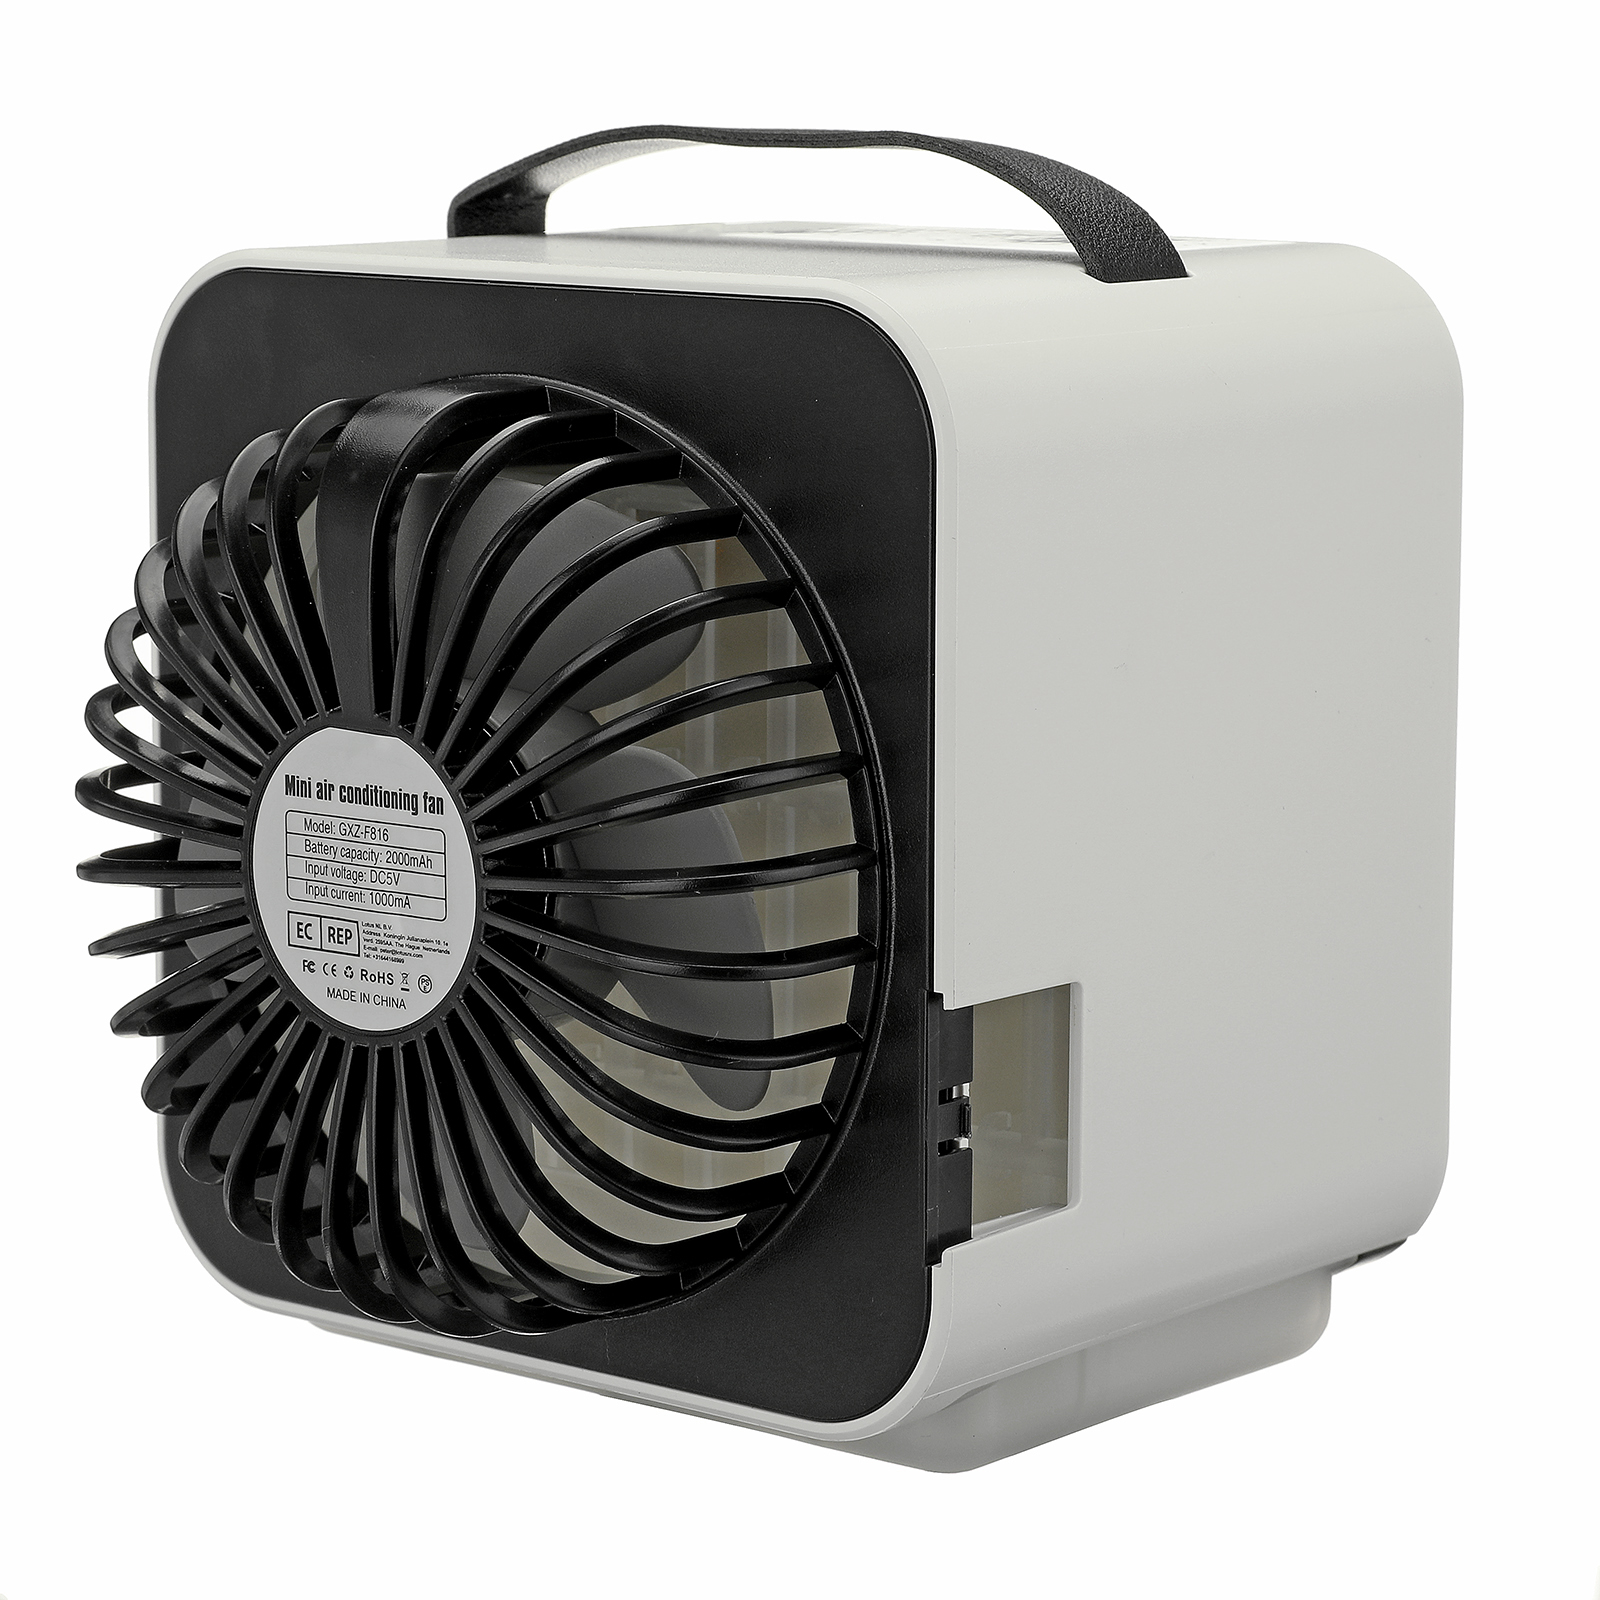 4-in-1-Mini-Air-Cooler-Portable-USB-Air-Conditioning-2000mAh-Cooling-Fan-3-Wind-Speed-Adjustment-Nig-1885394-10